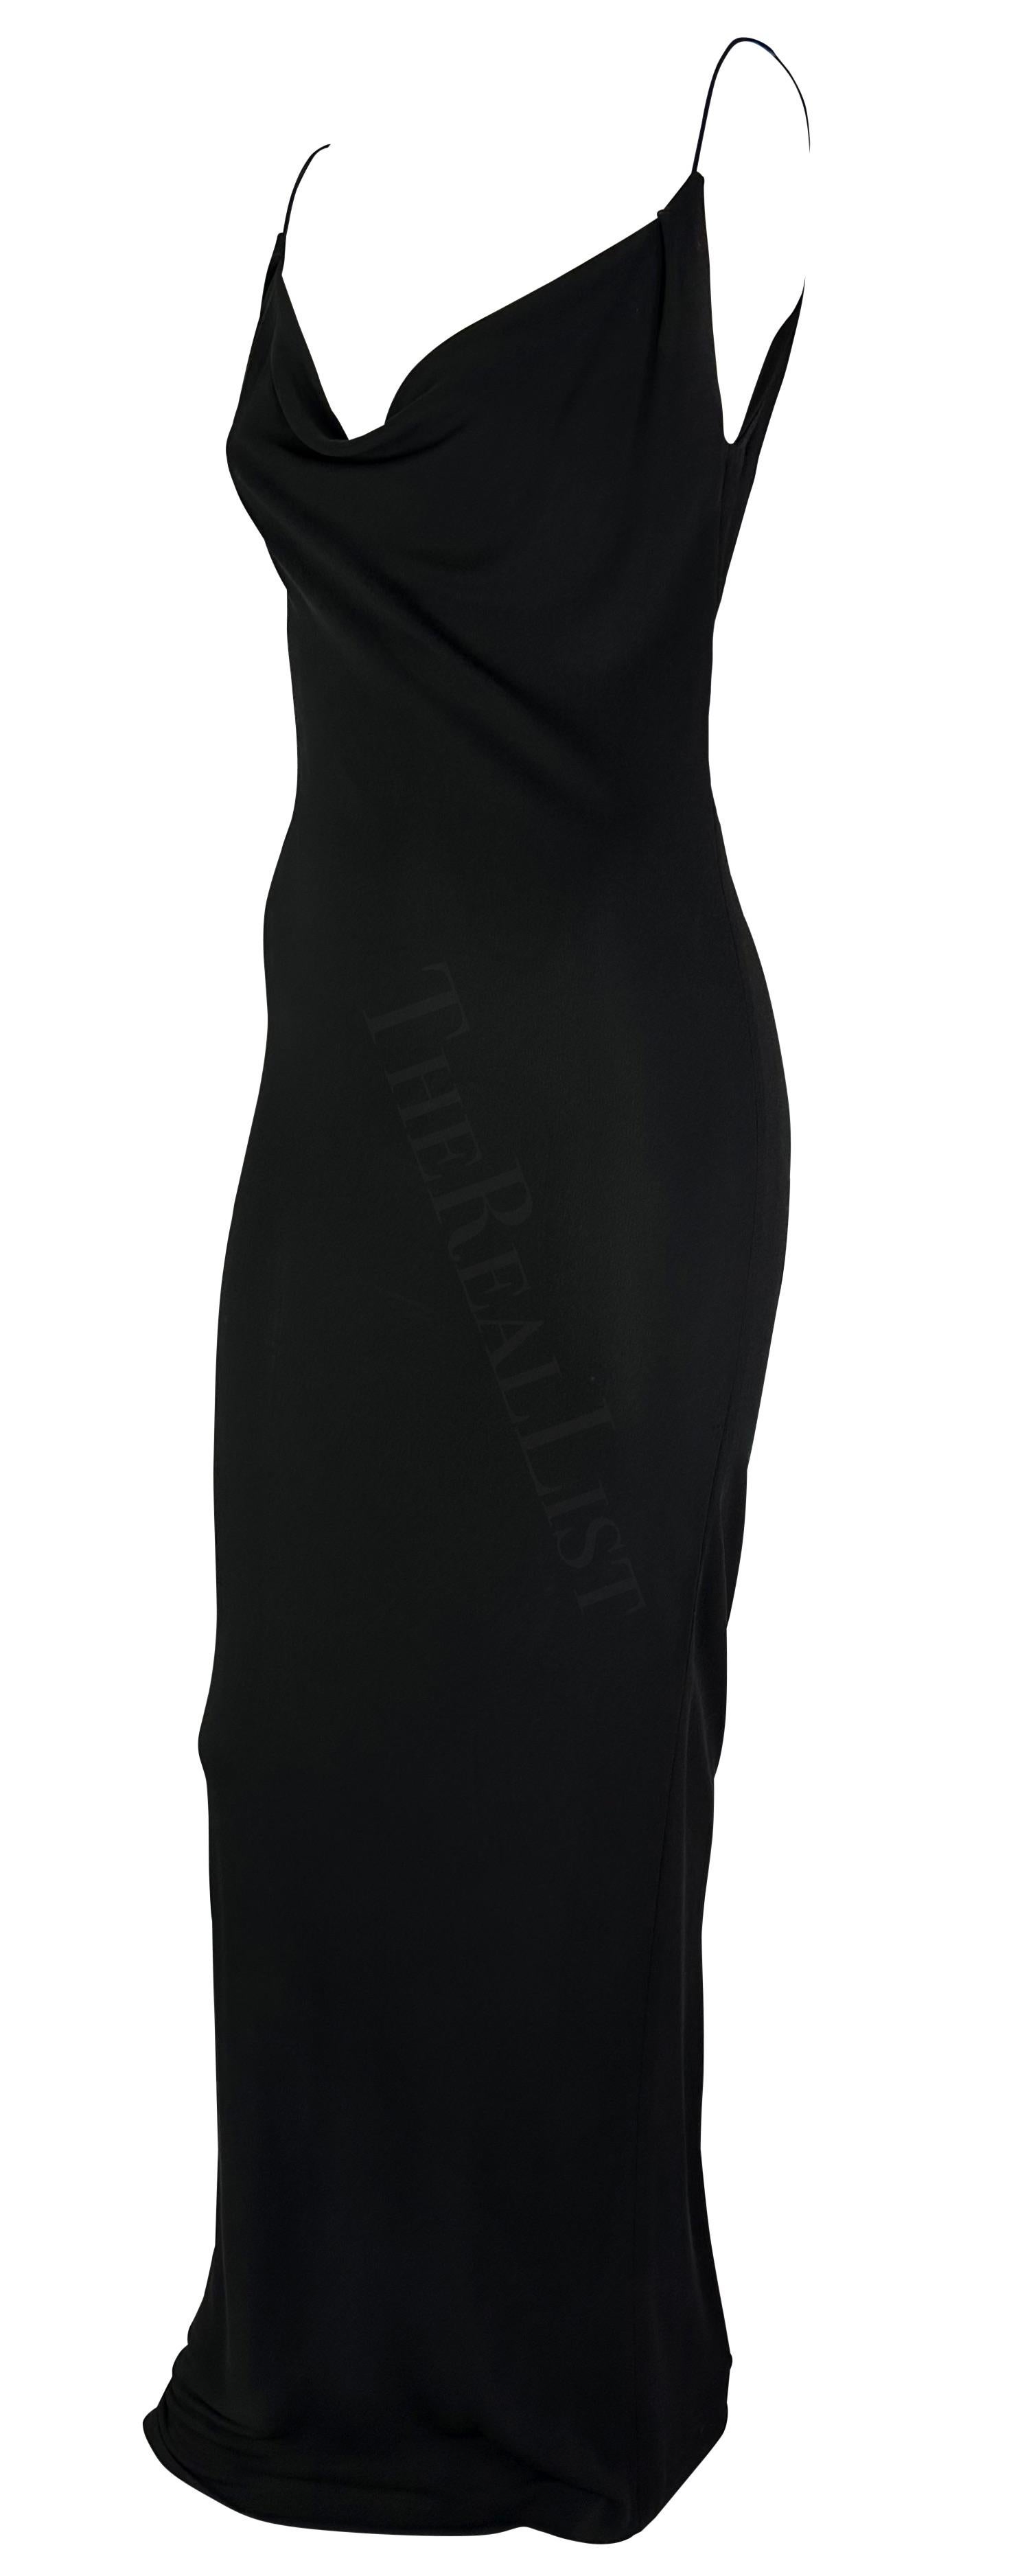 Women's S/S 1997 Gucci by Tom Ford Plunging Cowl Black Slip Bodycon Gown  For Sale